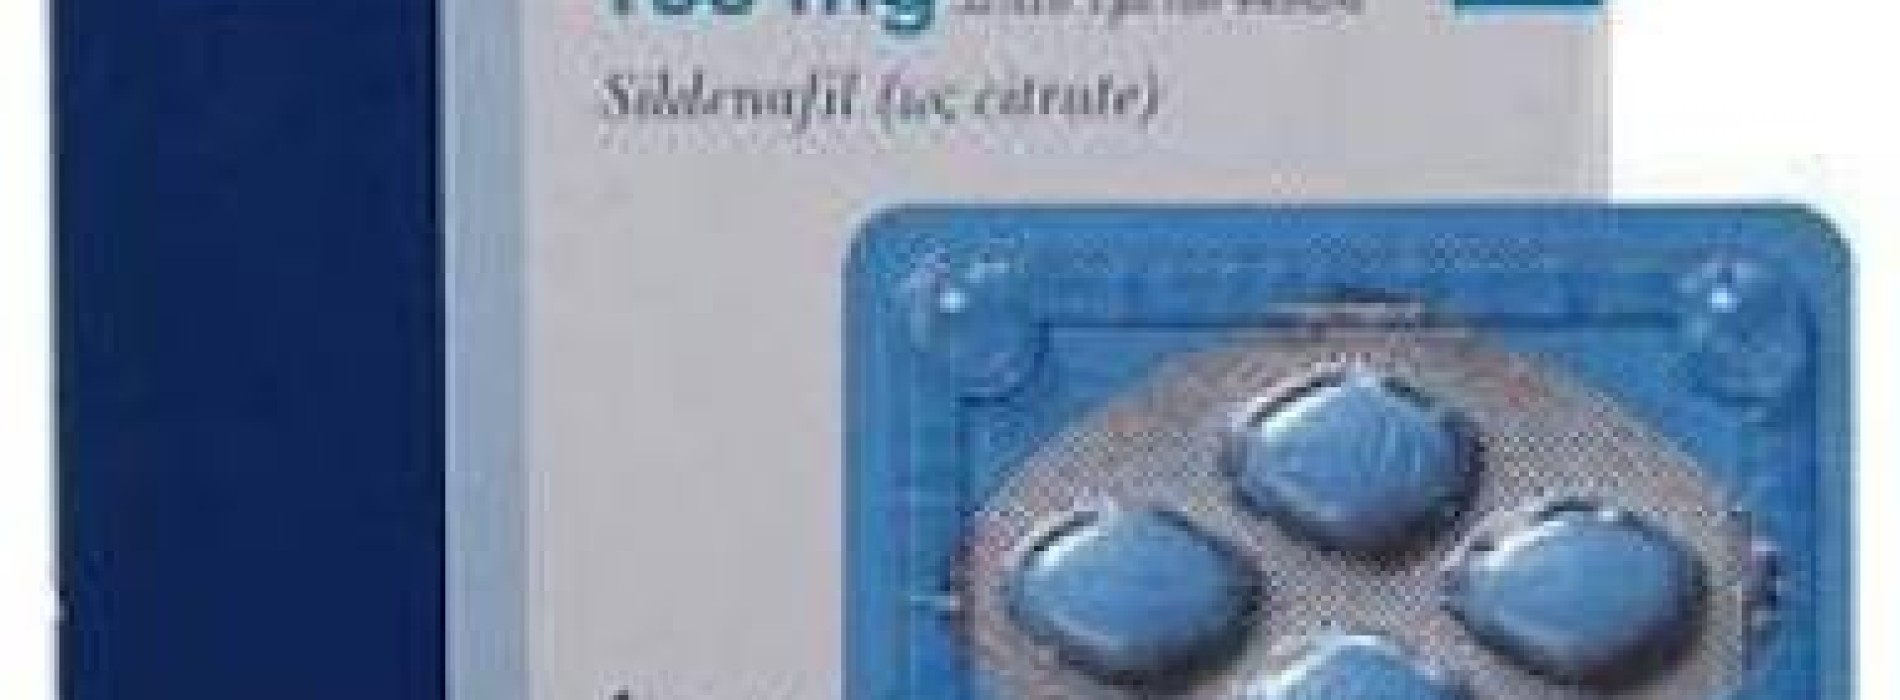 Viagra could reduce risk of heart attack, new study shows